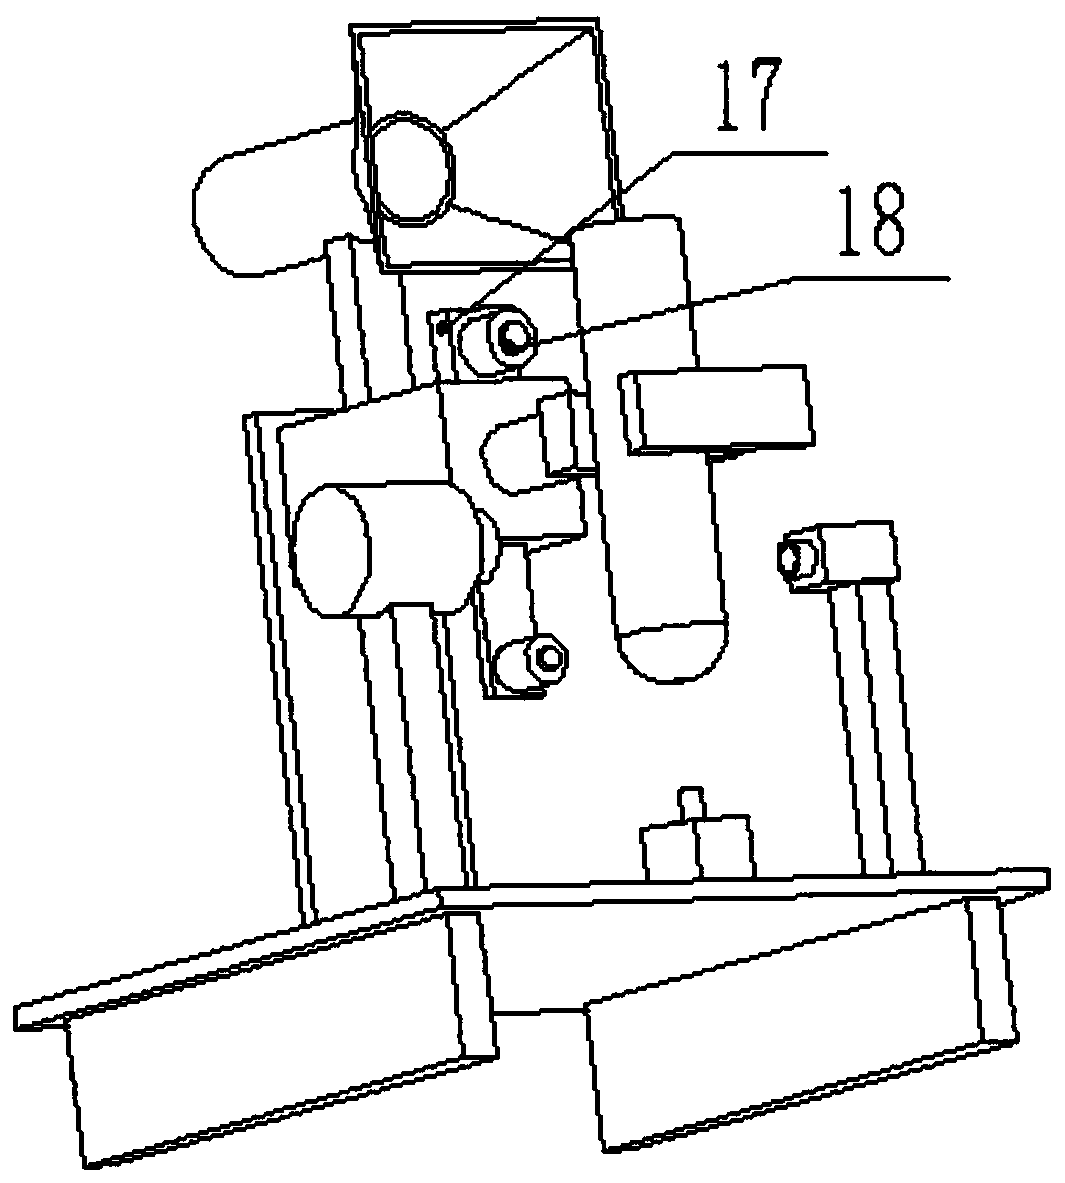 Test tube shaking device for medical tests